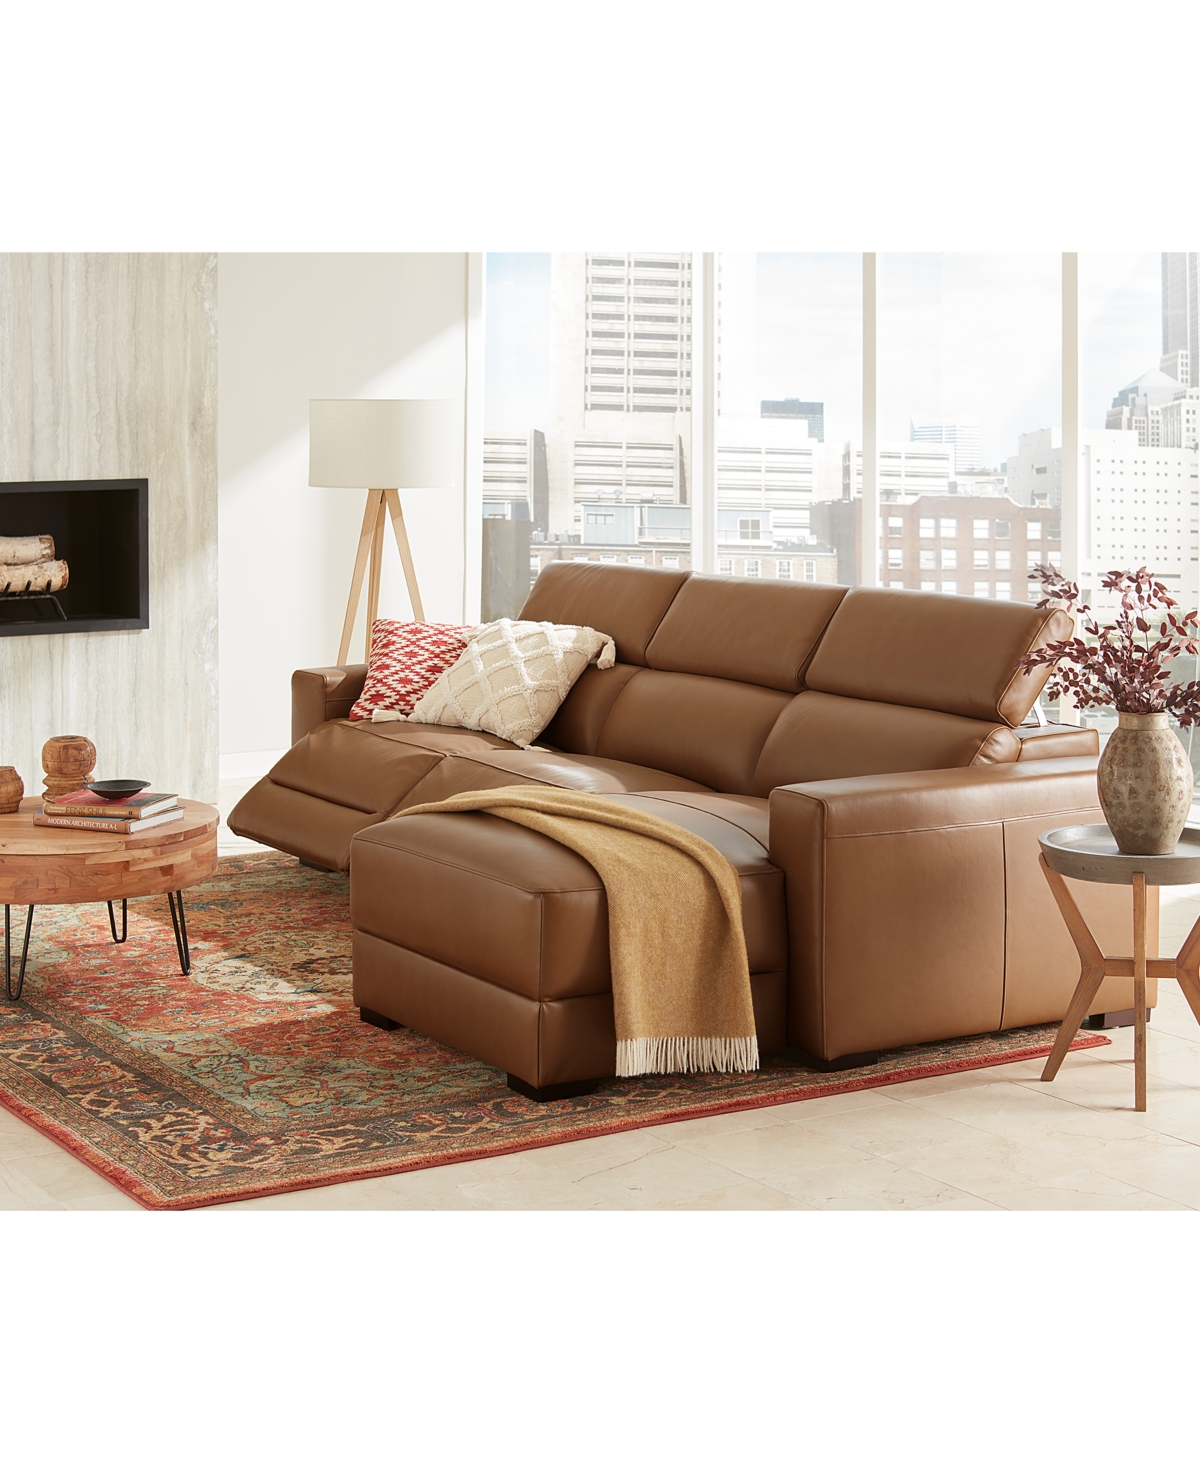 Shop Macy's Nevio 157" 6-pc. Leather Sectional With 2 Power Recliners And Headrests, Created For  In Butternut